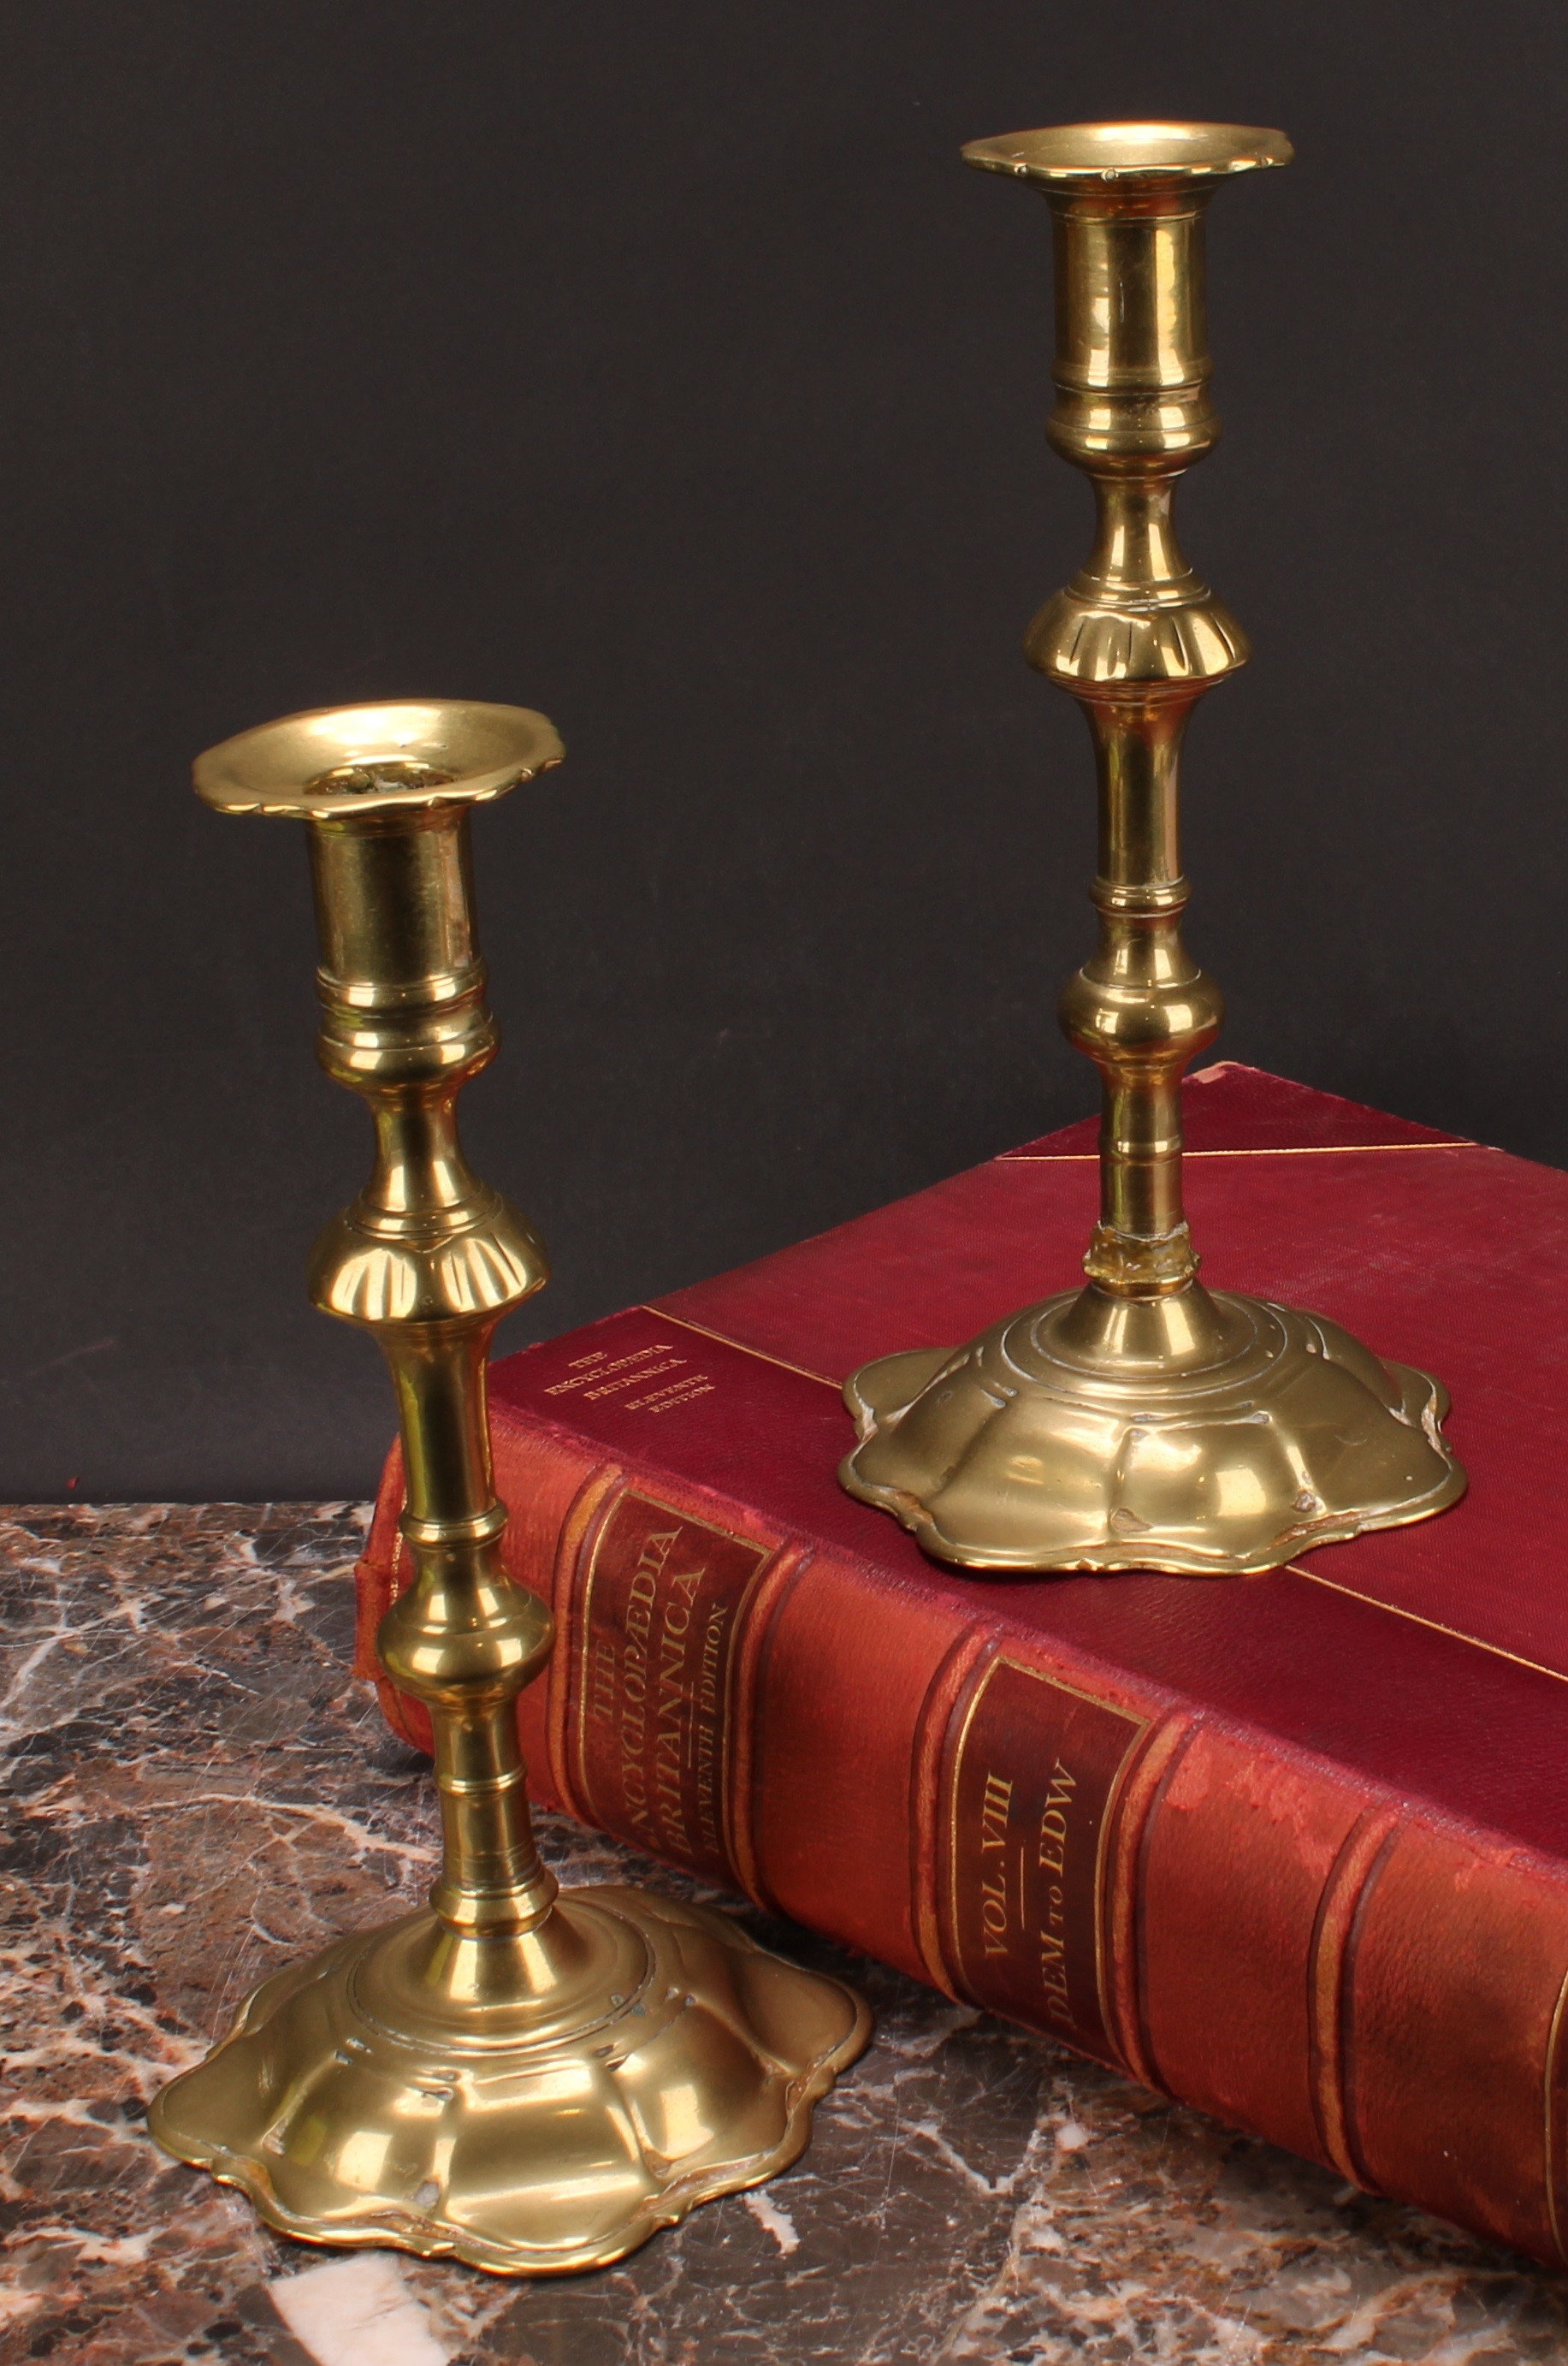 A pair of George II brass candlesticks, knopped pillars, domed shaped bases, 24cm high, c.1745